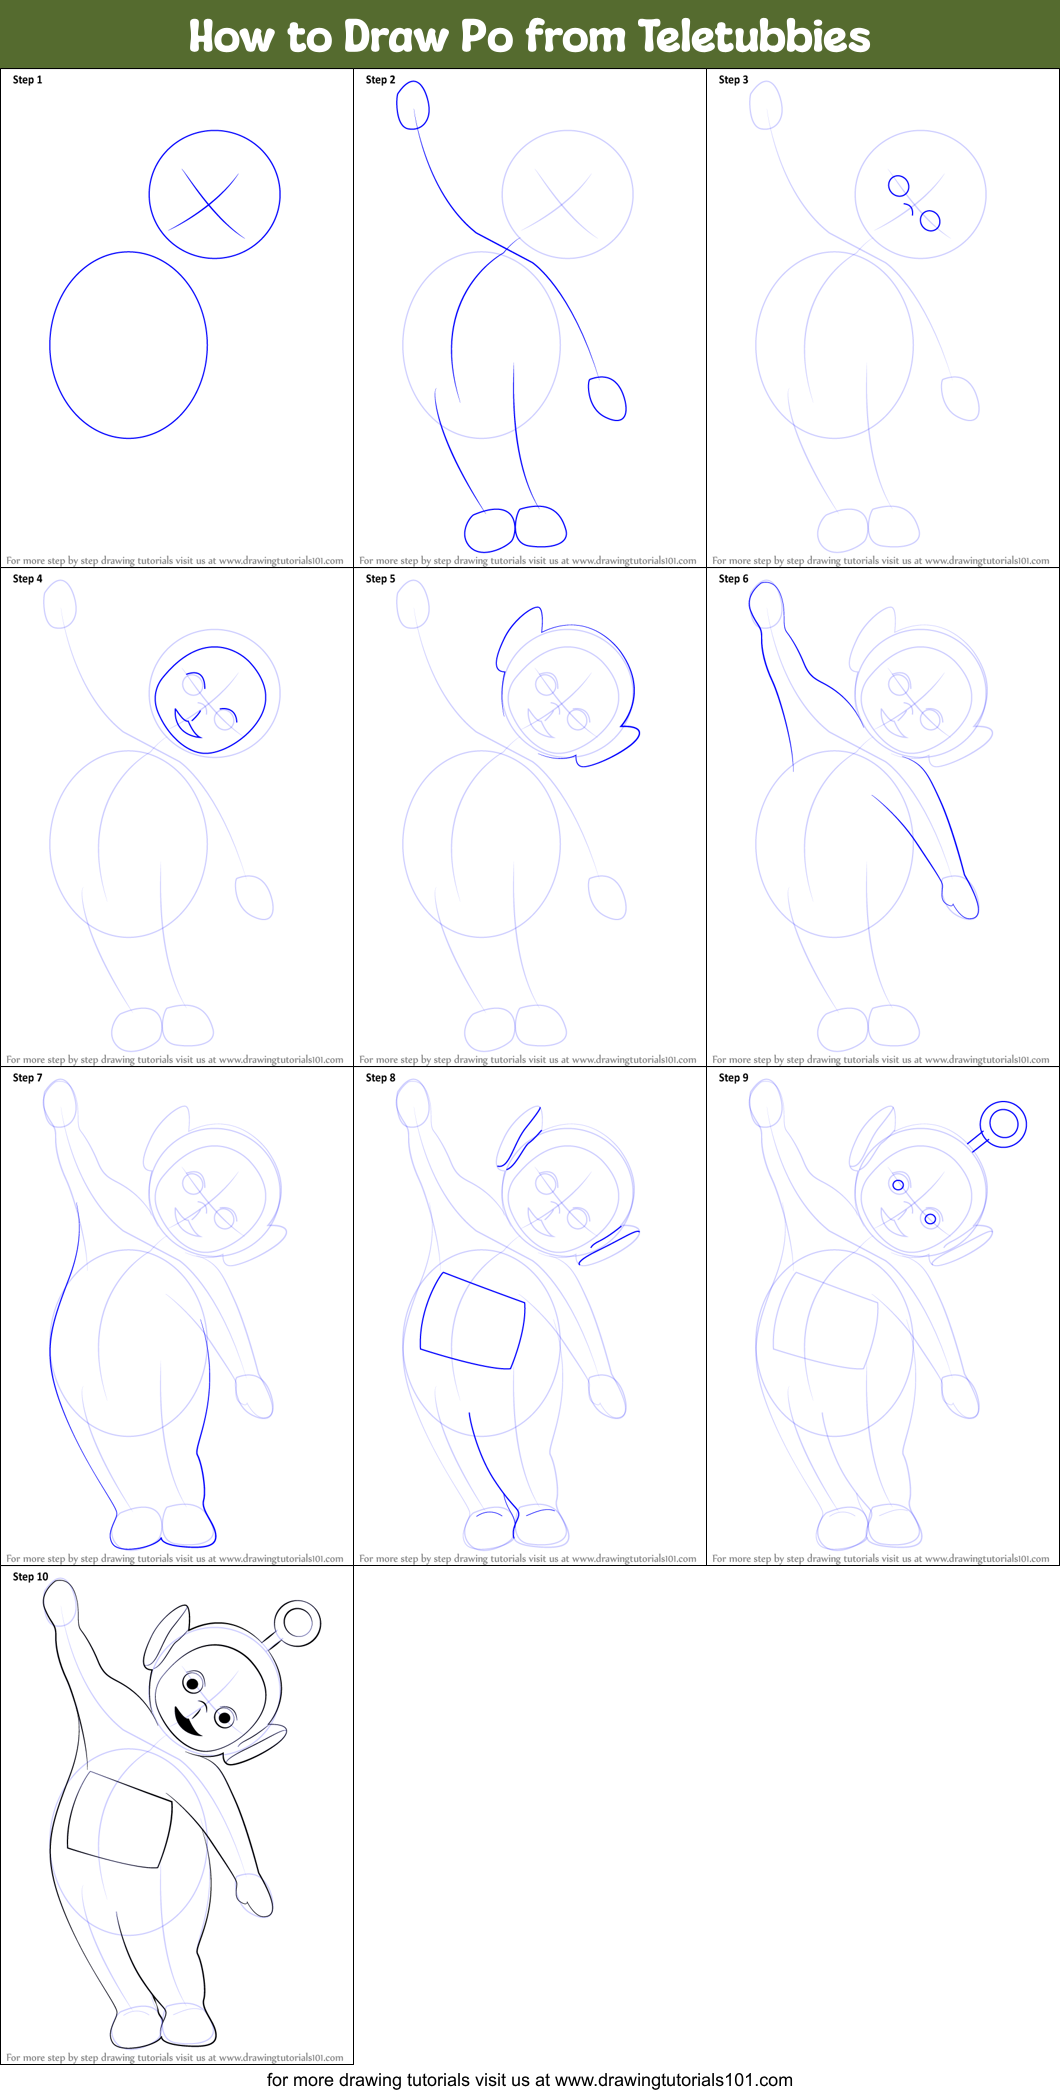 How to Draw Po from Teletubbies printable step by step drawing sheet